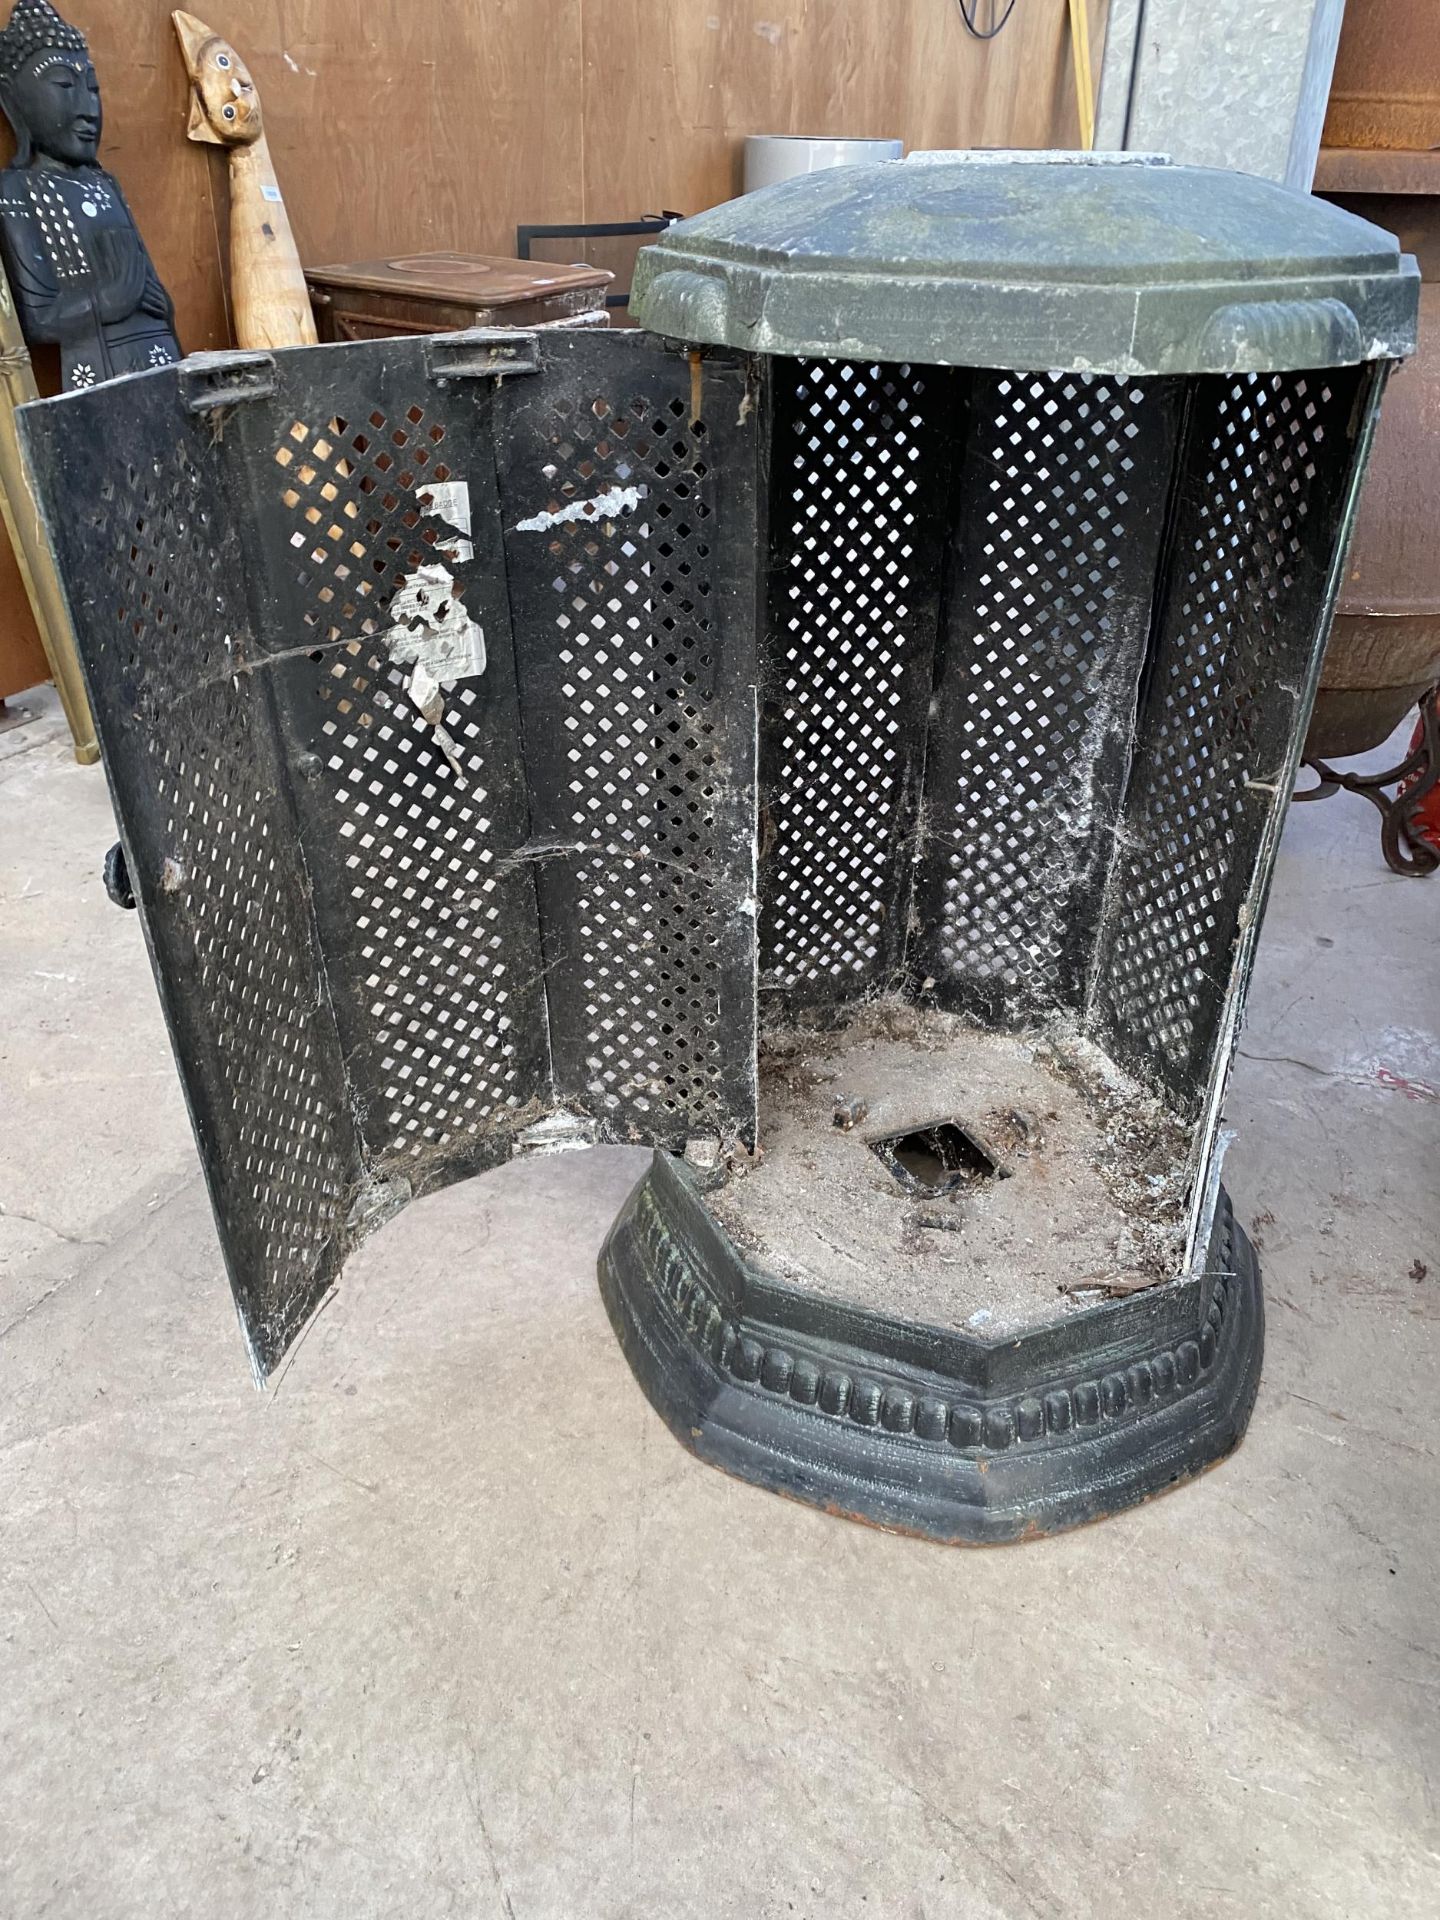 A CAST ALLOY PATIO HEATER BASE - Image 4 of 4